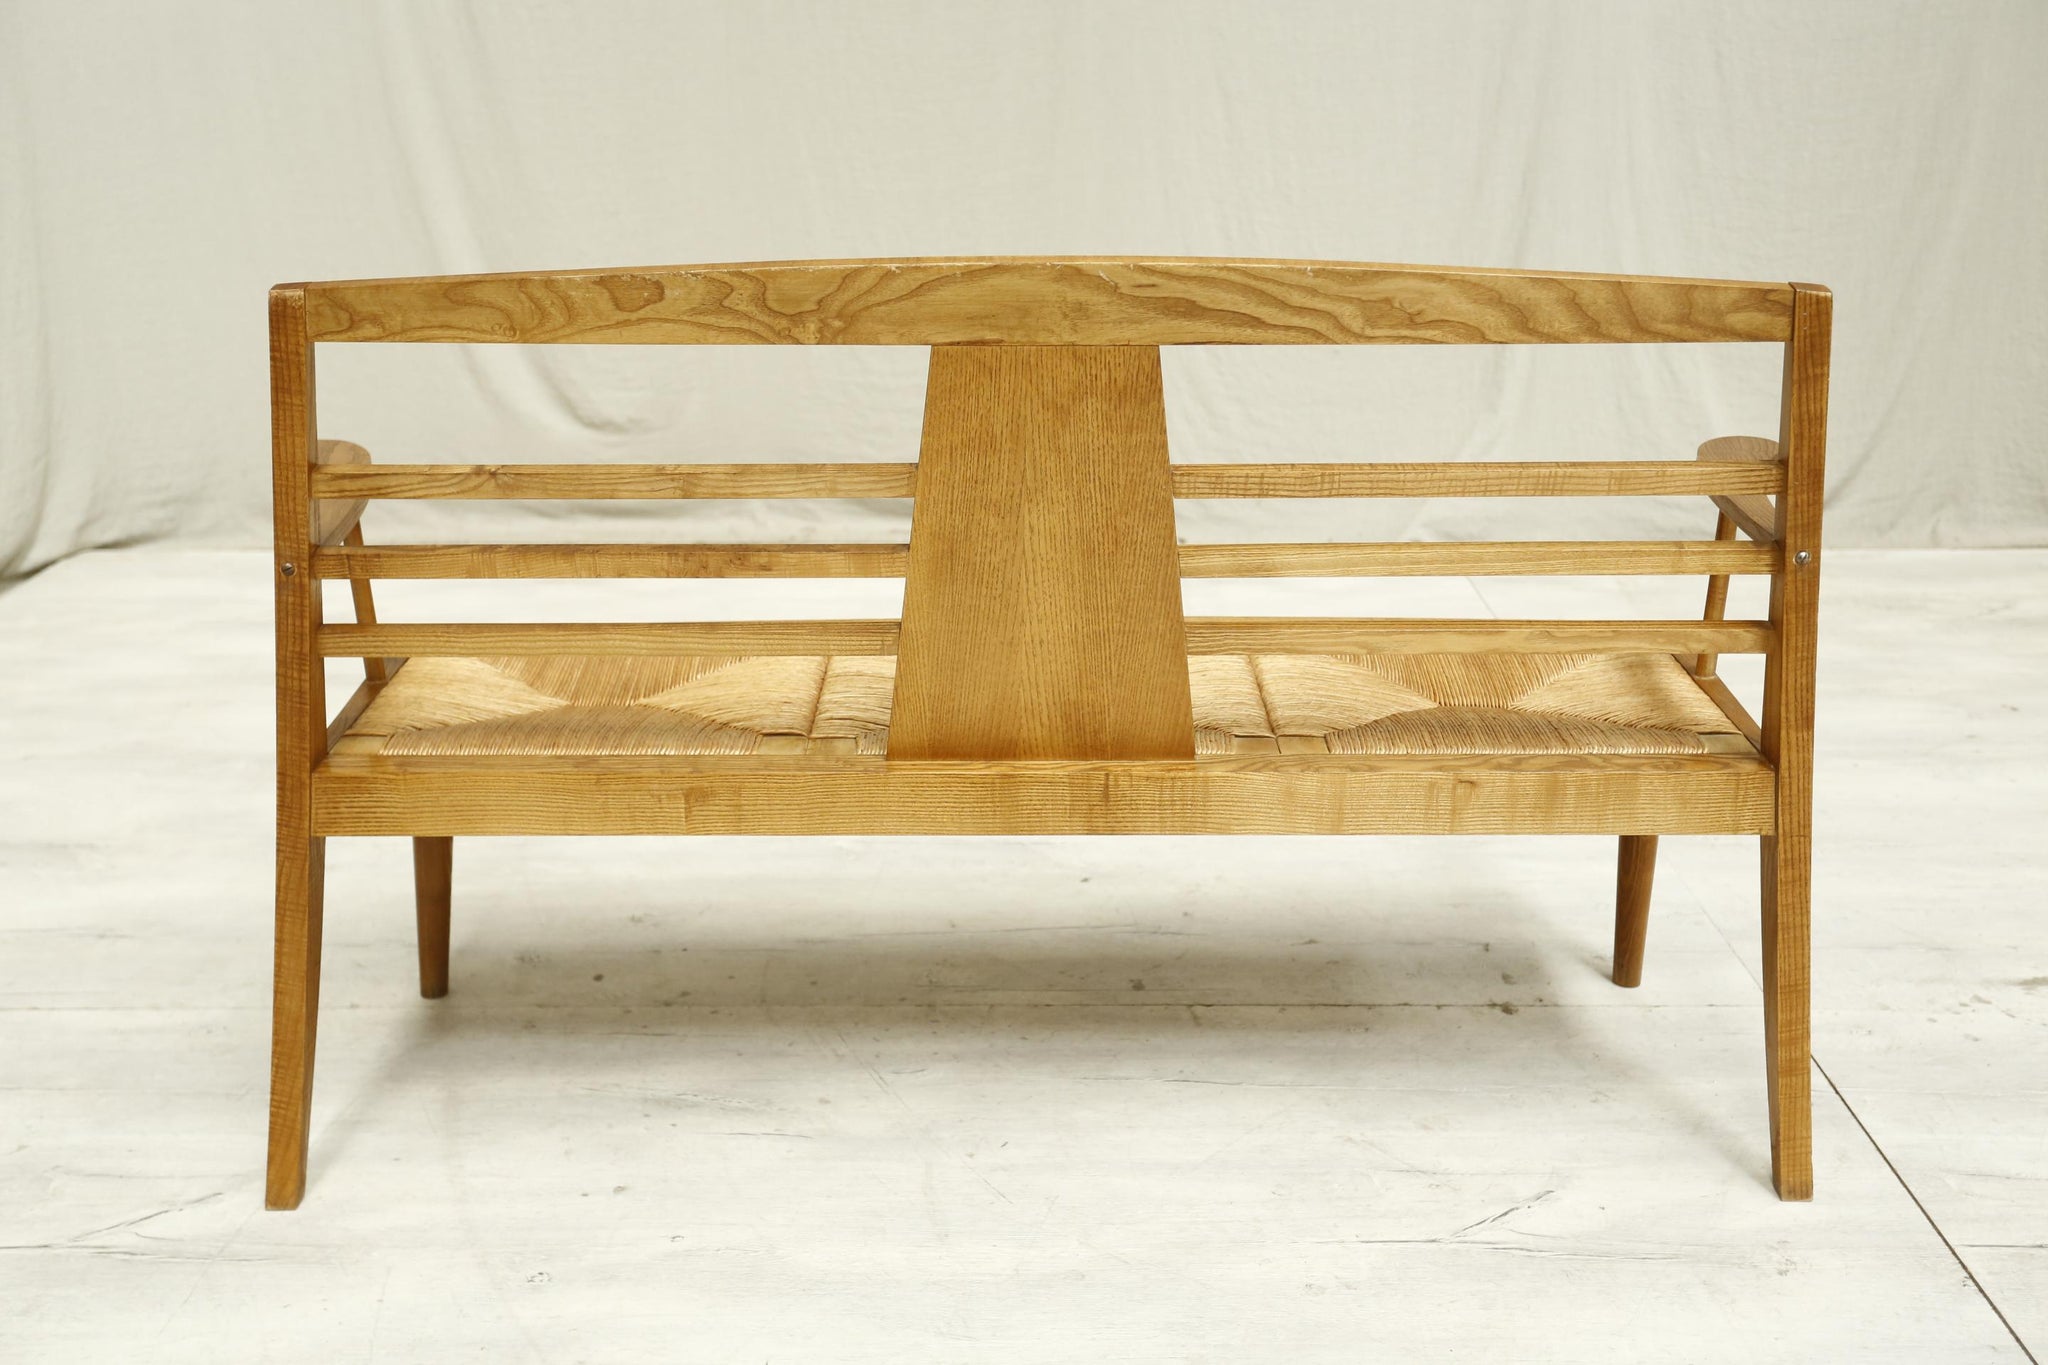 20th century French oak rush seated bench